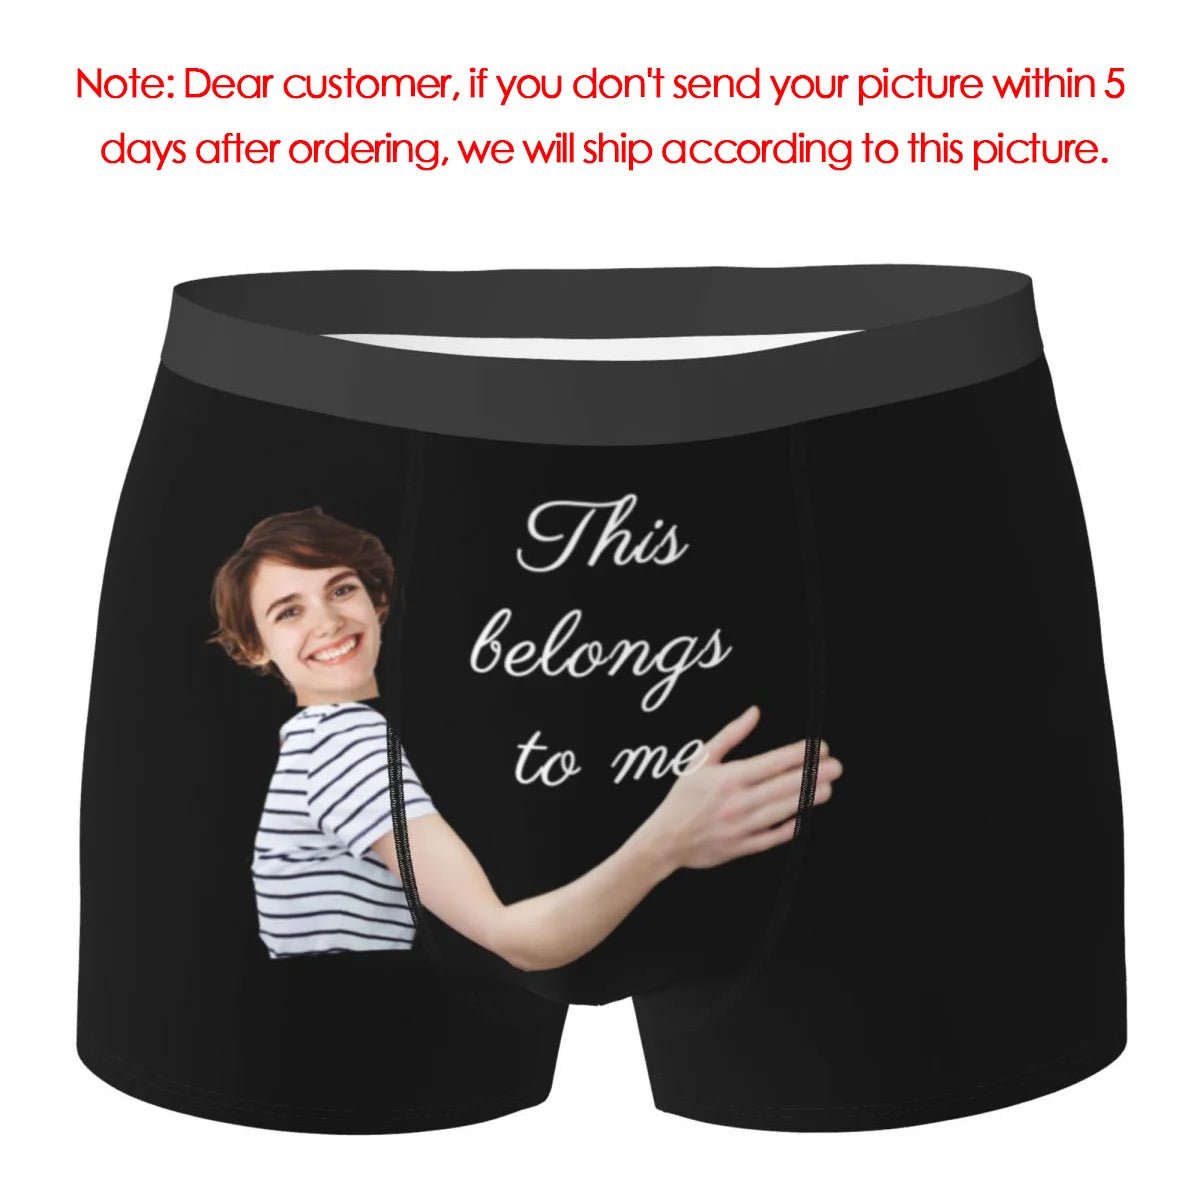 Personalized Mens Boxers With Face | Custom Photo Novelty Underwear Gift - VarietyGifts